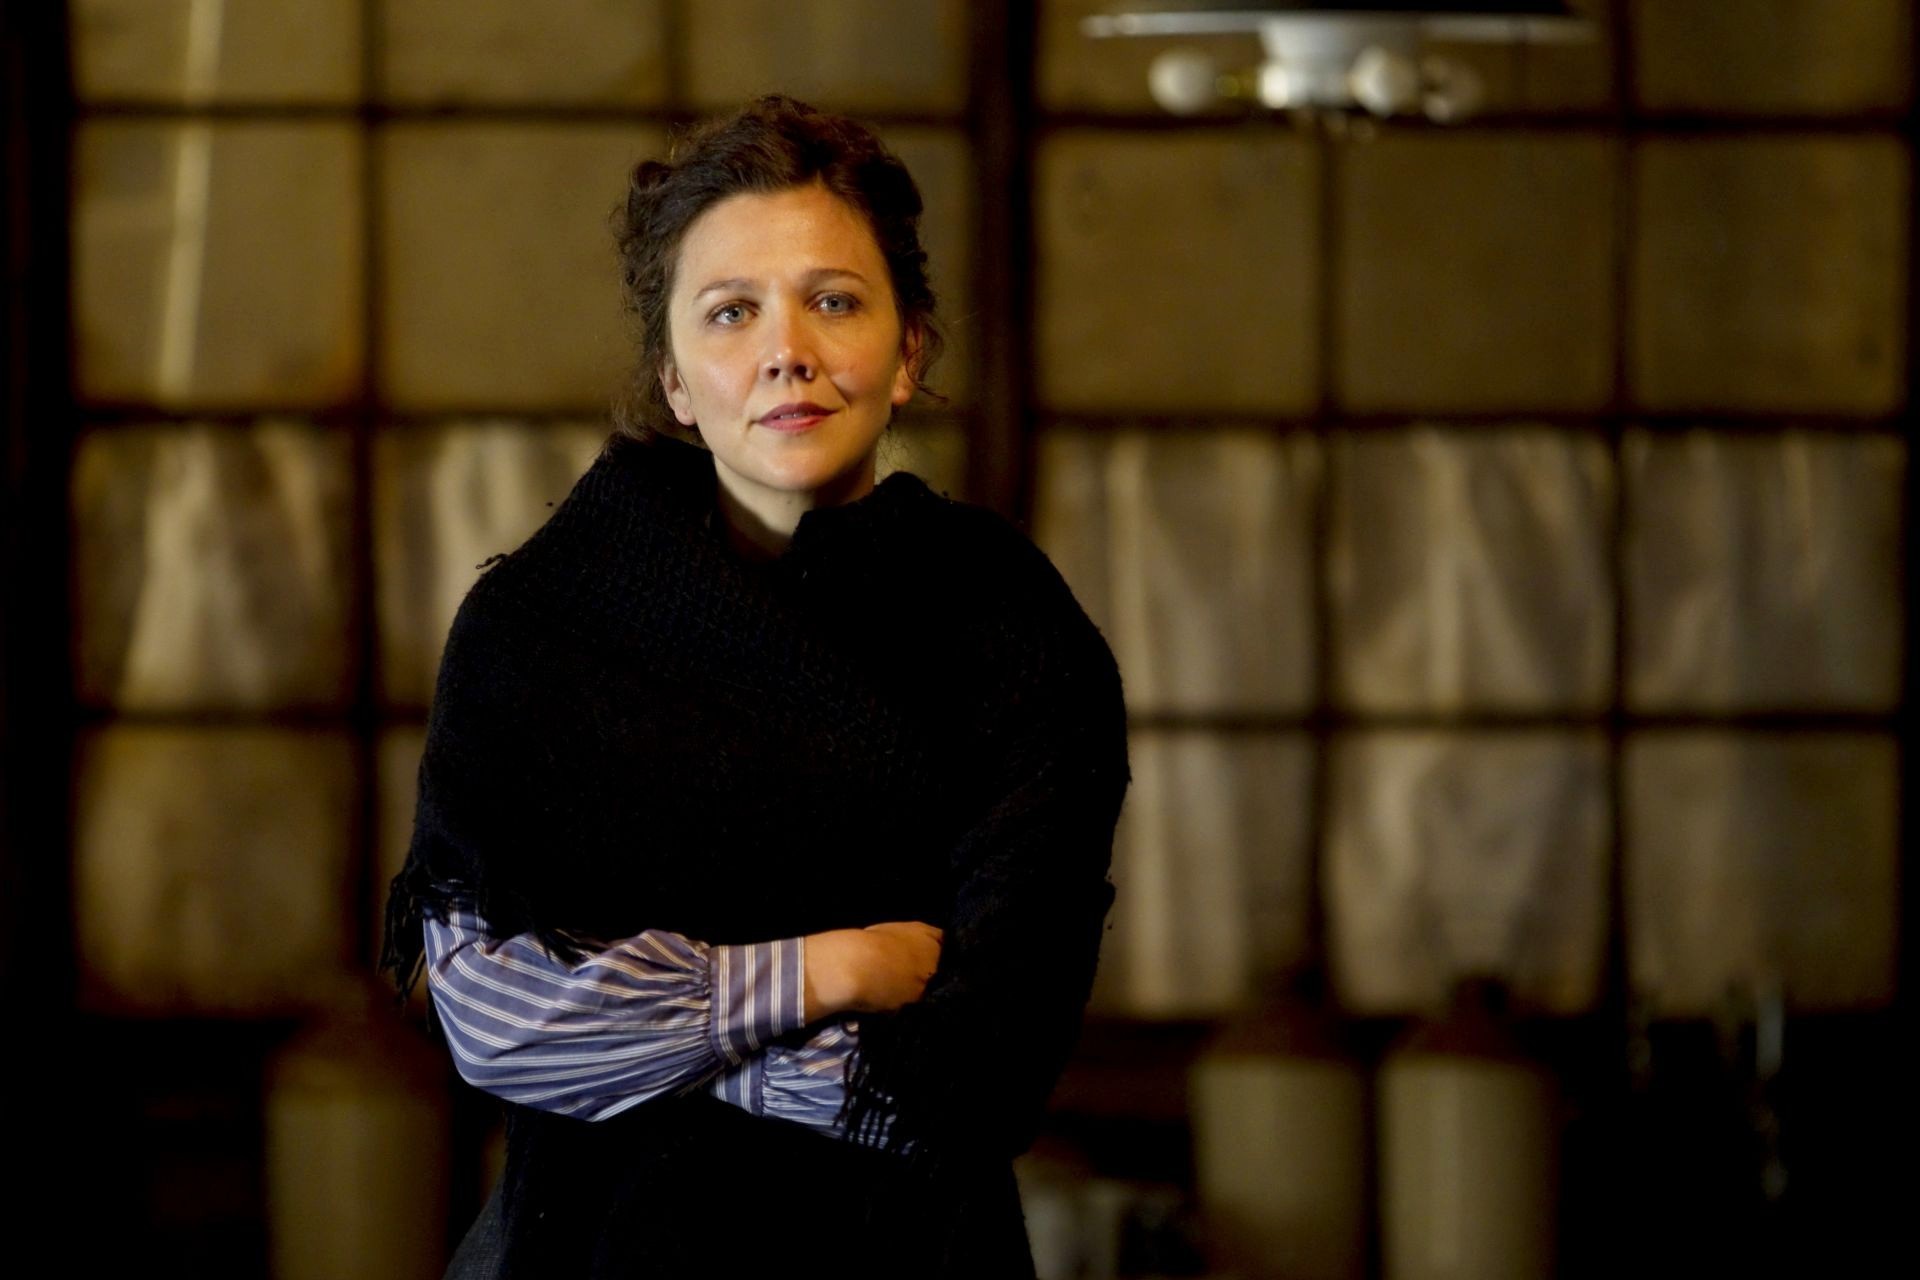 Maggie Gyllenhaal stars as Charlotte Dalrymple in Sony Pictures Classics' Hysteria (2012). Photo credit by Ricardo Vaz Palma.